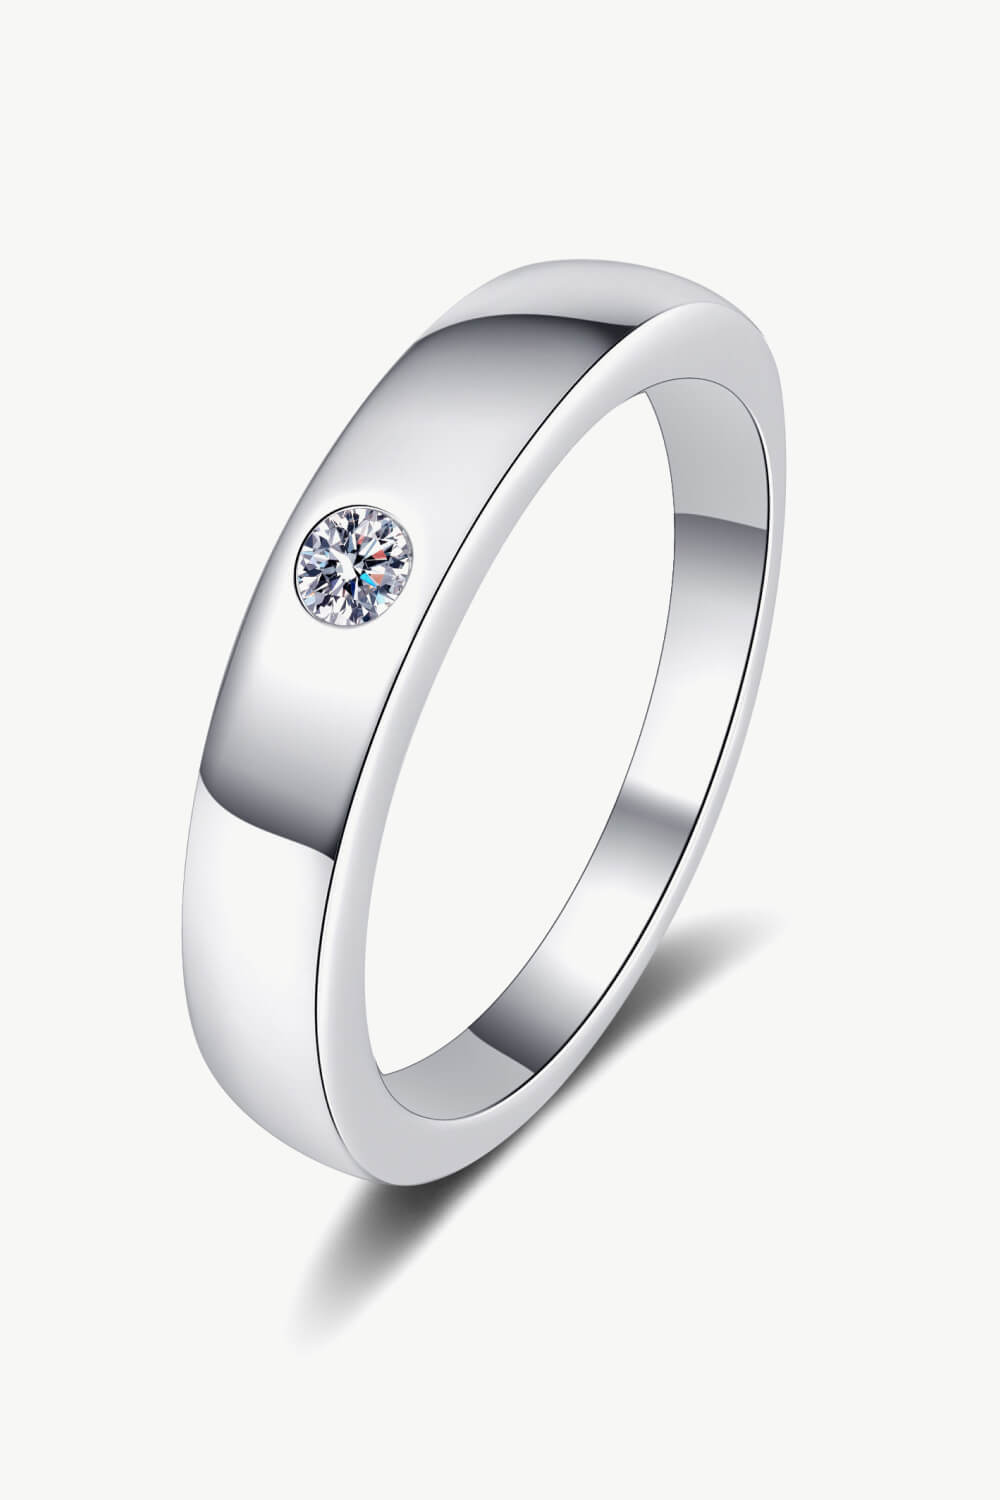 Create Your Dream Life Moissanite-Rings-Inspired by Justeen-Women's Clothing Boutique in Chicago, Illinois